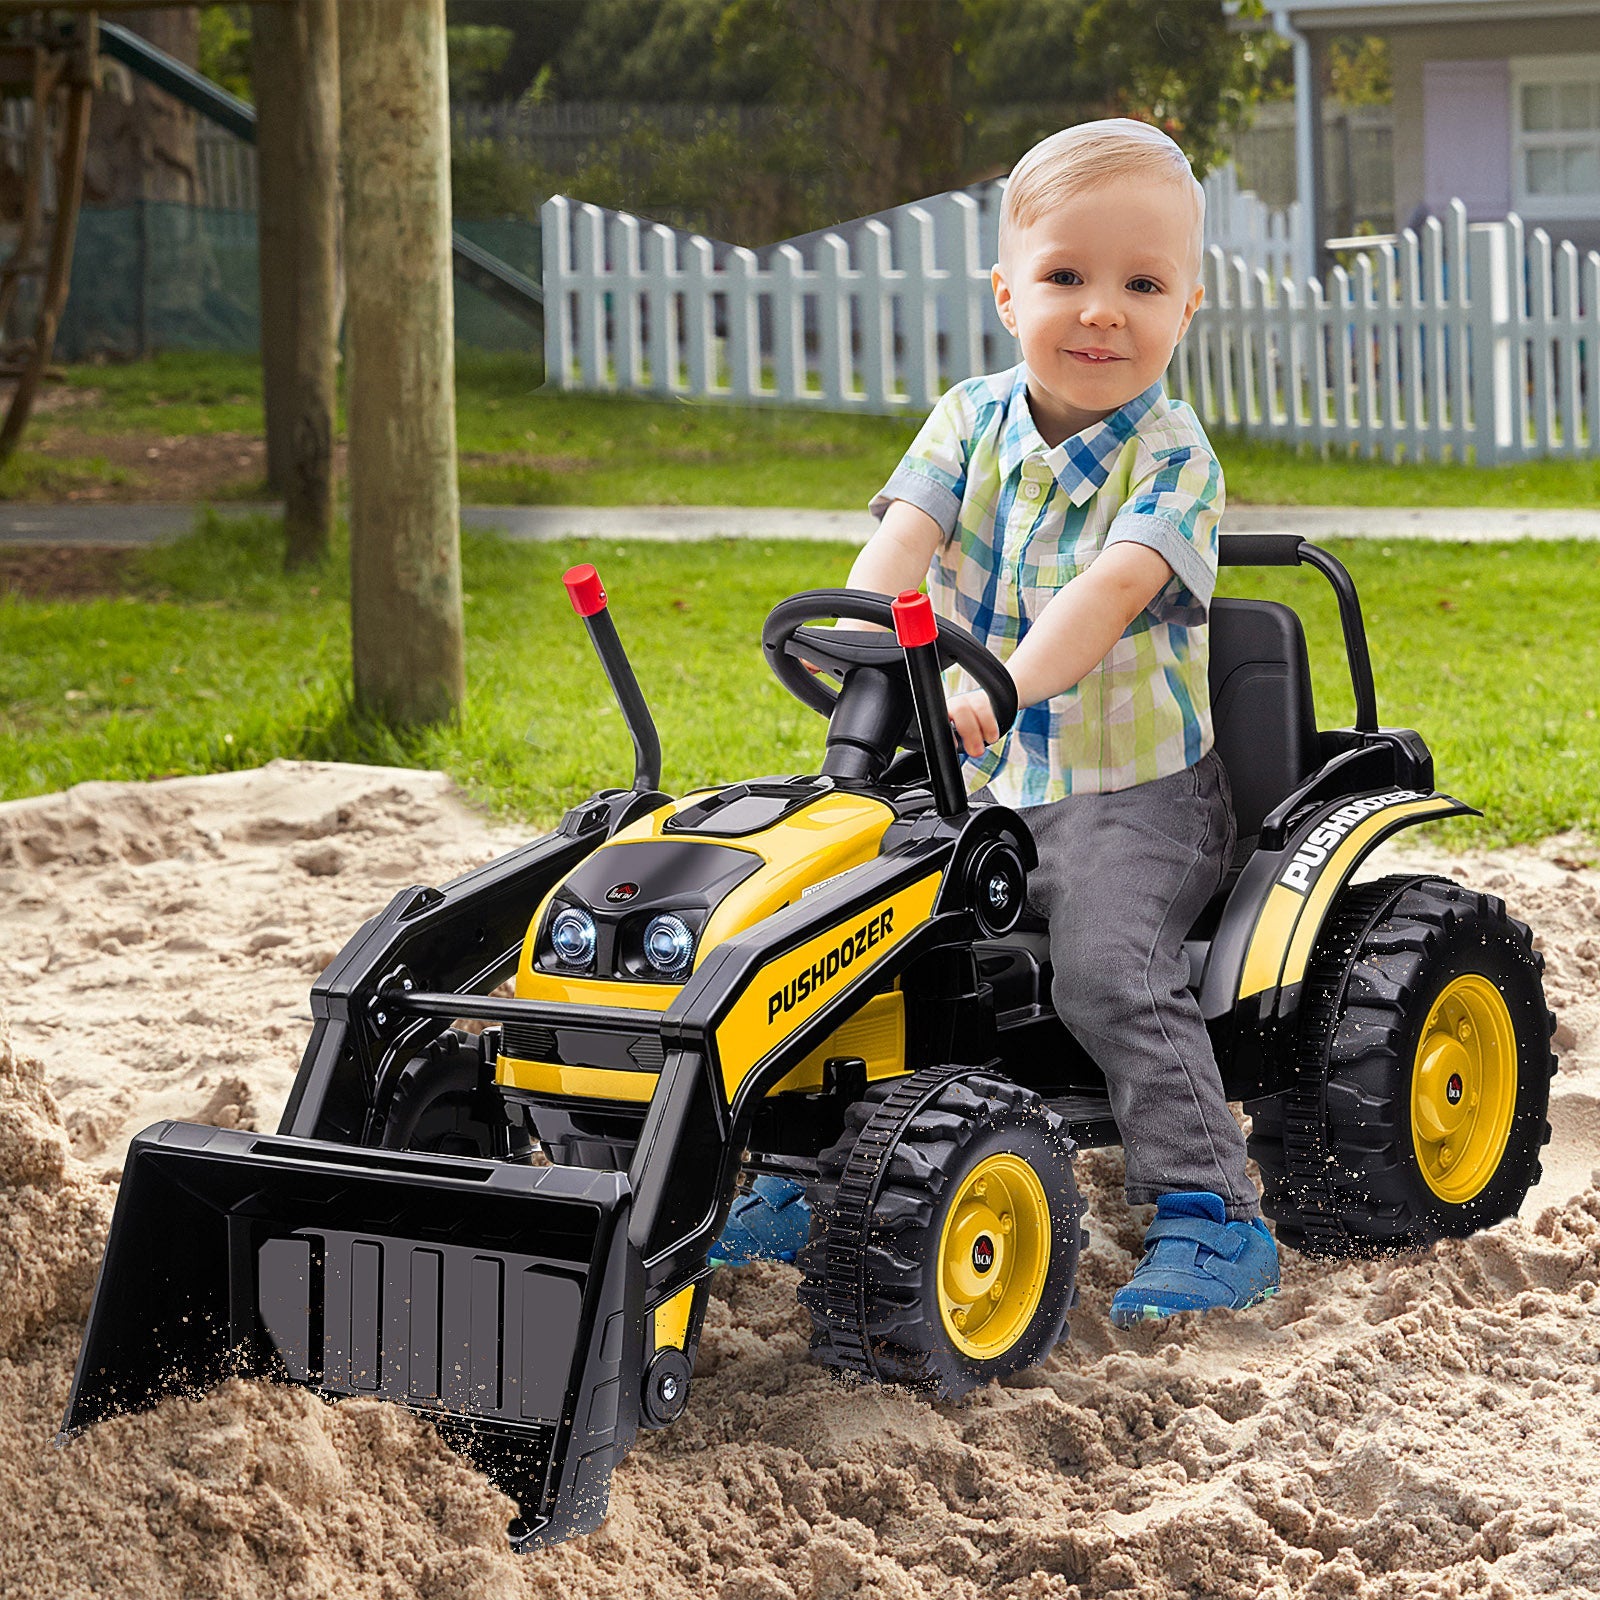 HOMCOM Kids Digger Ride On Excavator 6V Battery Powered Construction Tractor Music Headlight Moving Forward Backward Gear for 3-5 years old Yellow - TovaHaus